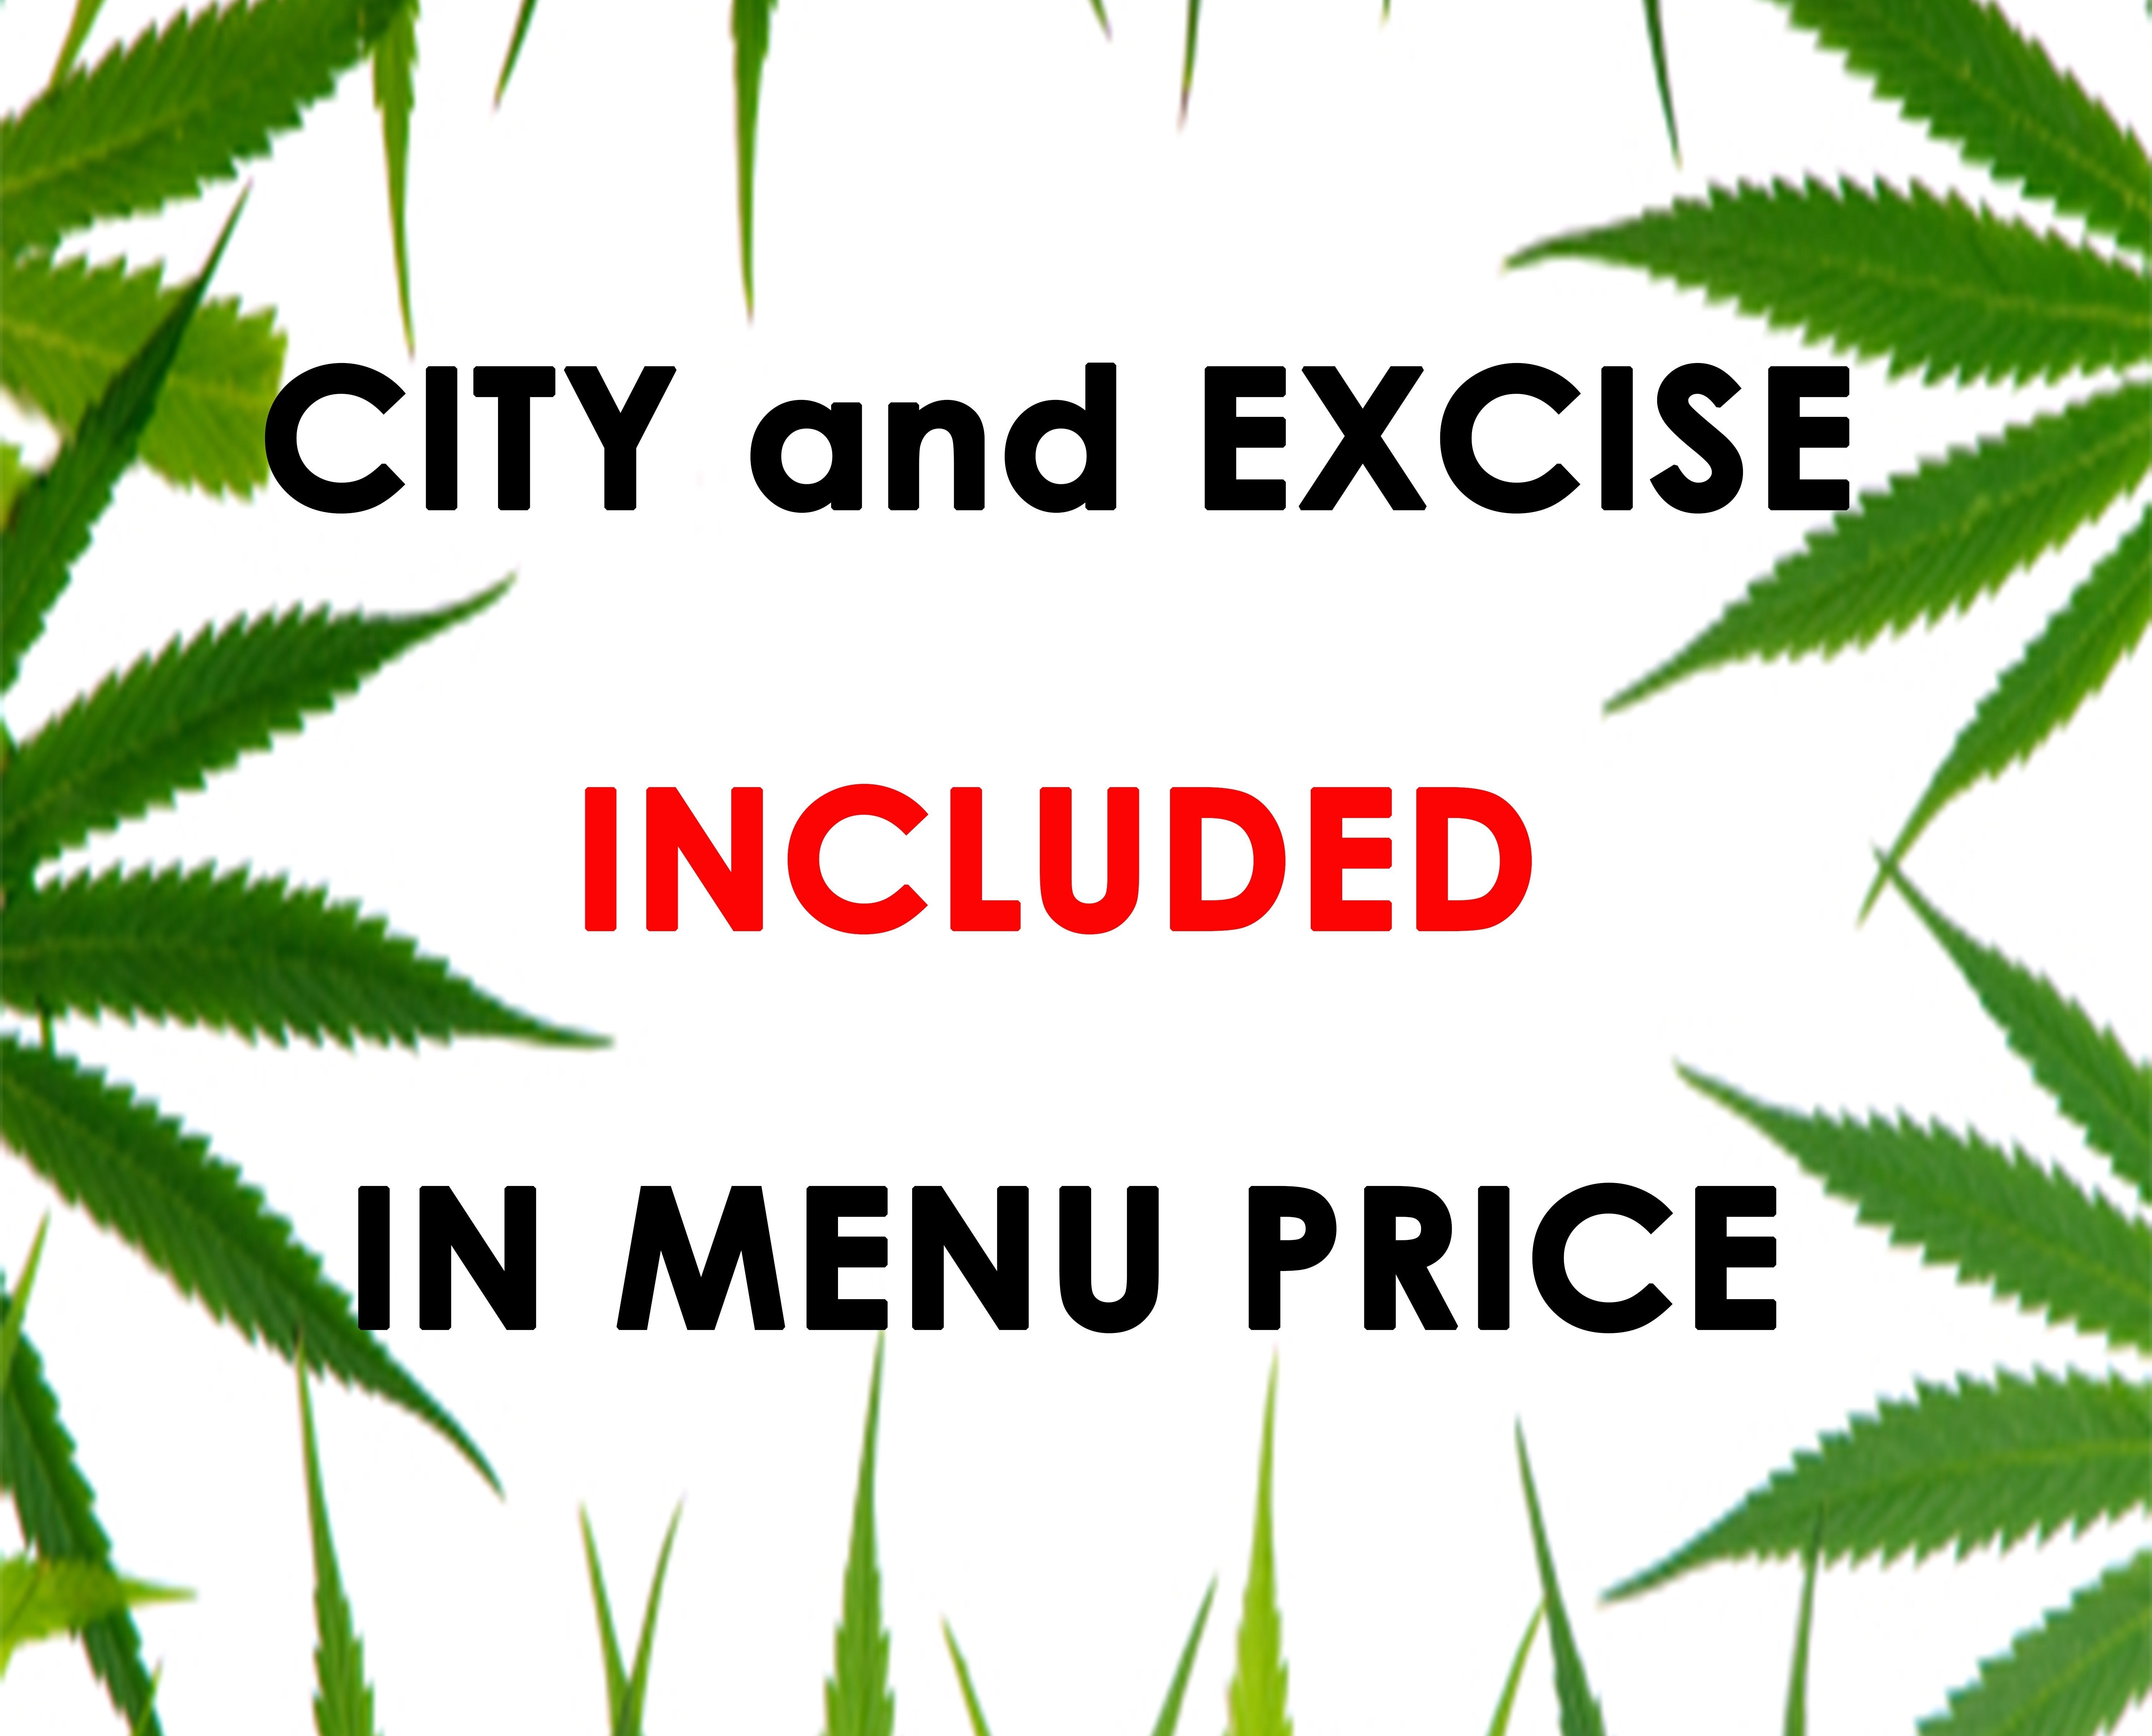 indica-city-and-excise-tax-included-in-menu-price